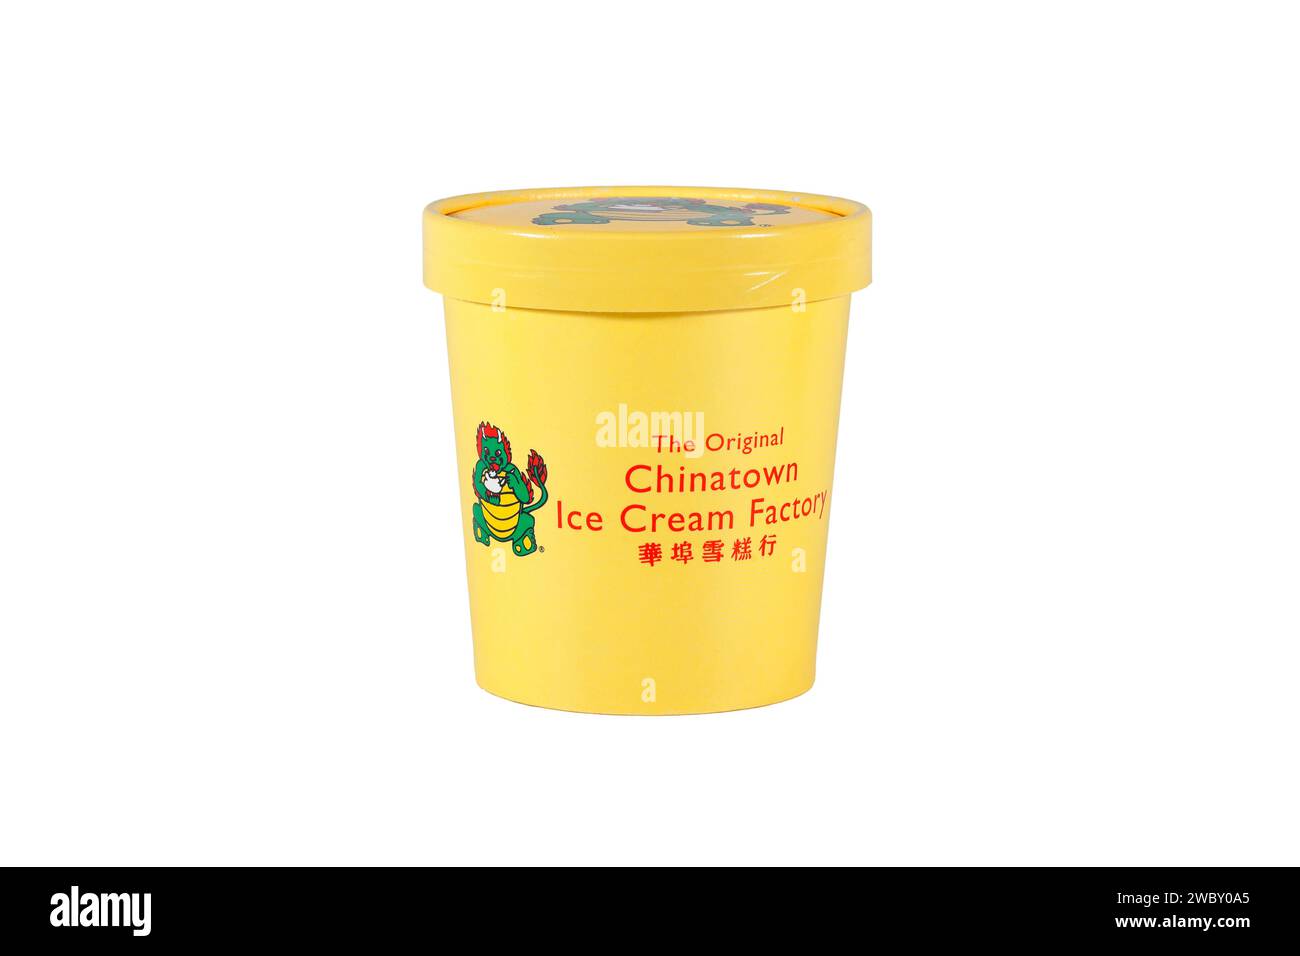 A pint sized container of Original Chinatown Ice Cream Factory ice cream 華埠雪糕行 isolated on a white background. cutout image for illustration editorial Stock Photo